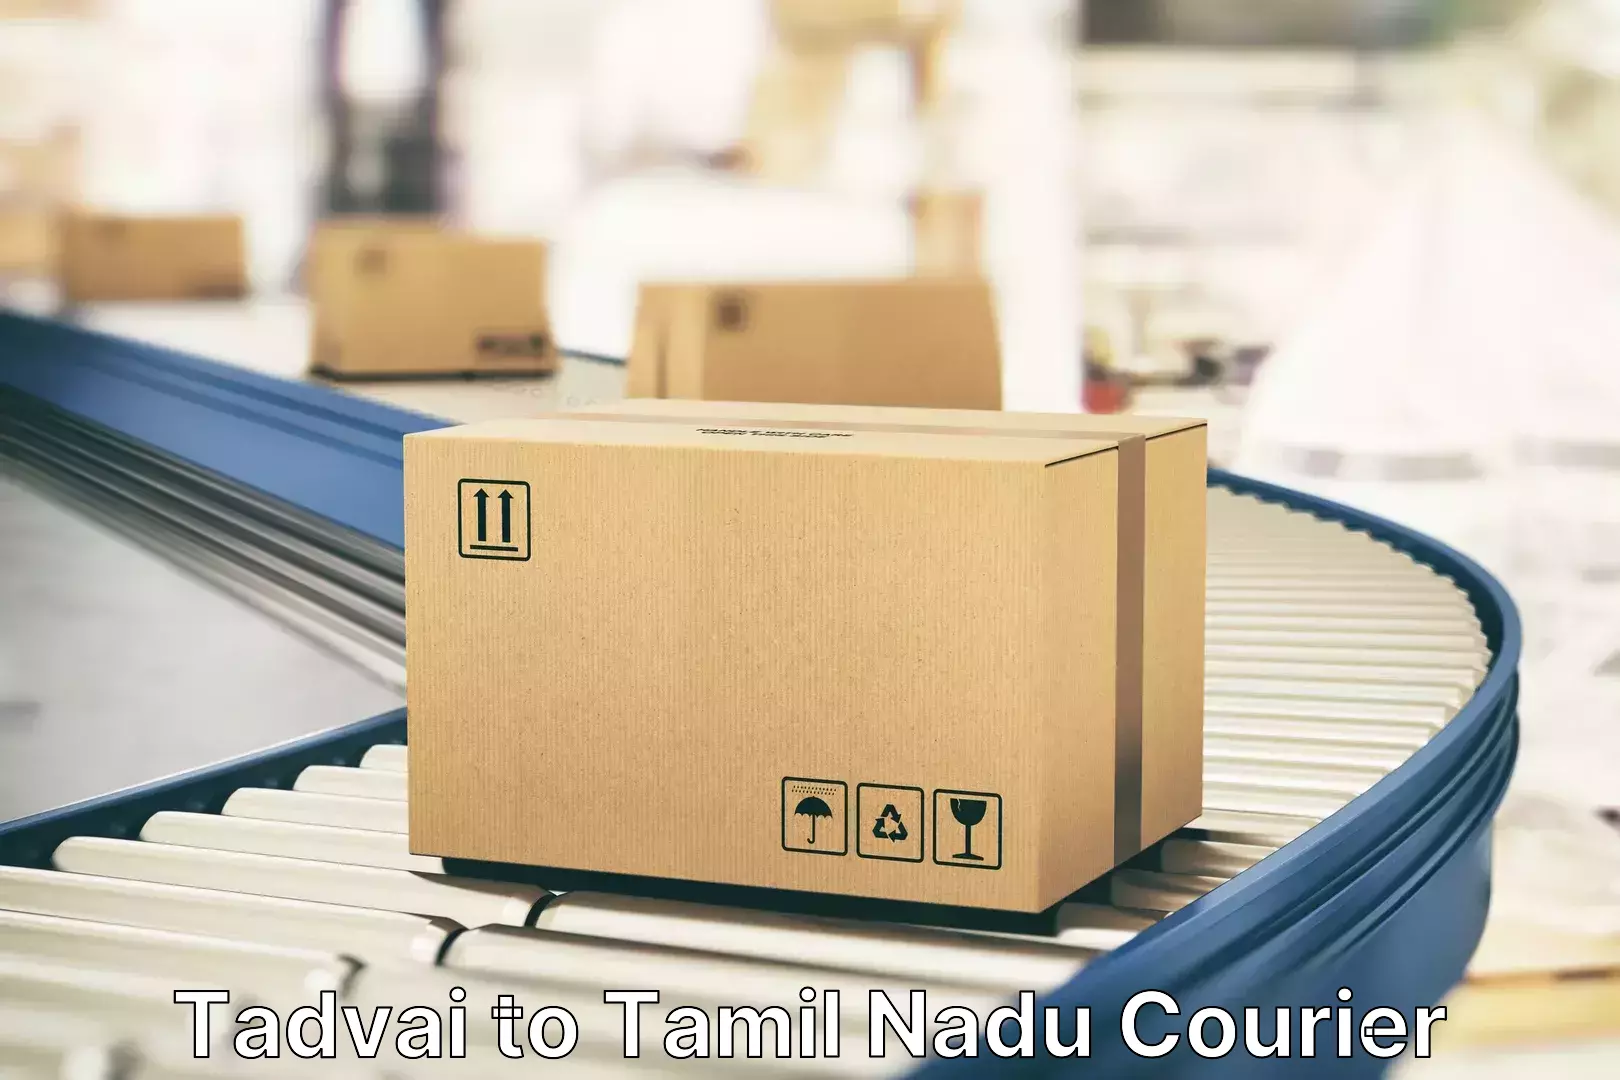 Luggage shipping guide Tadvai to Tiruppur